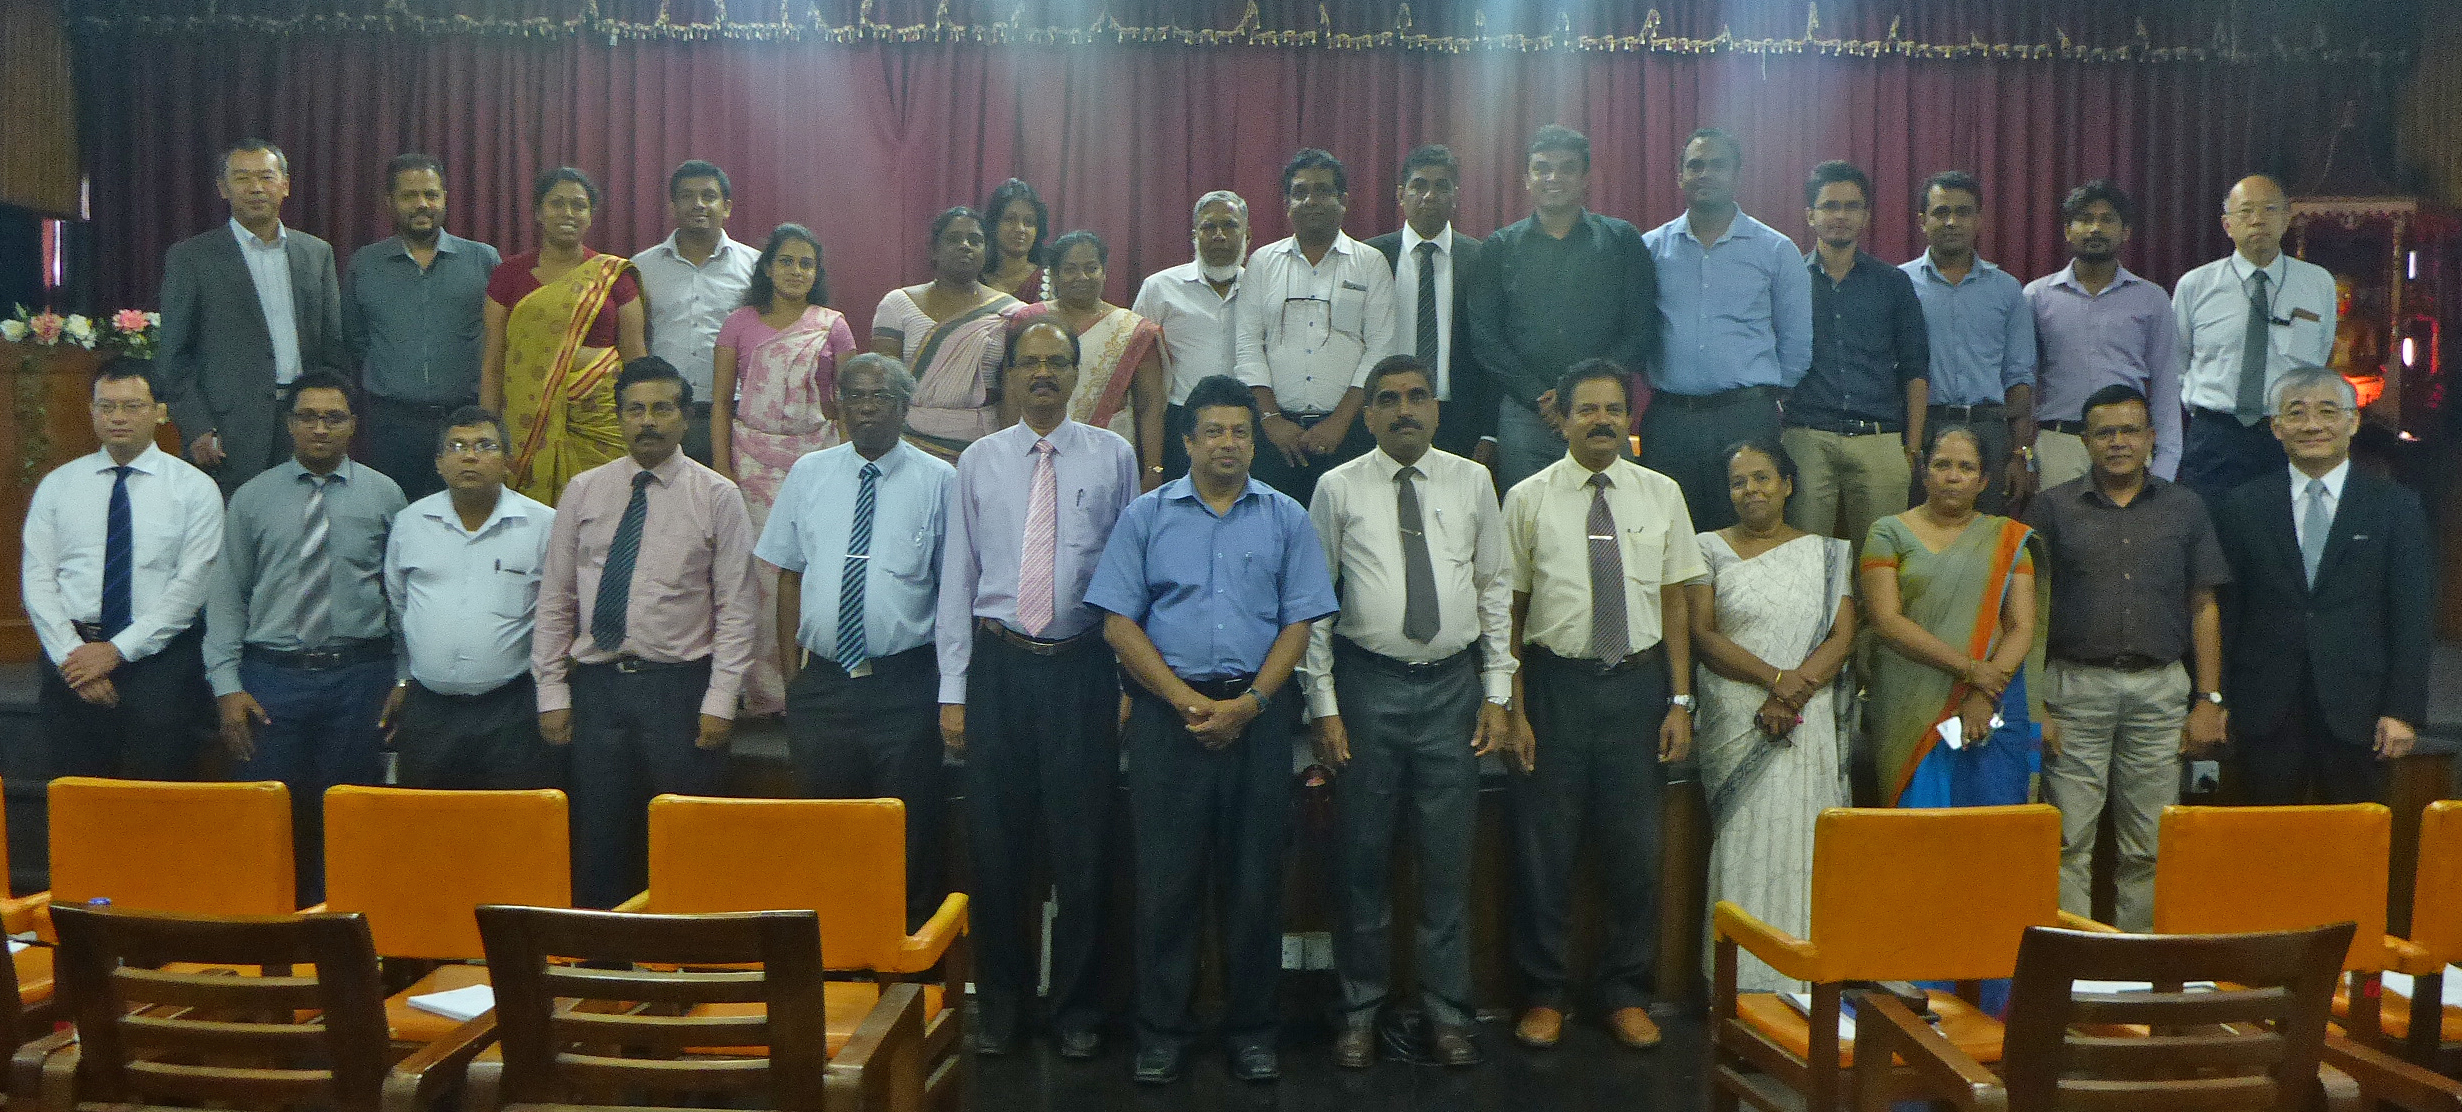 participants of Plenary Session for the Platform on Water and Disasters in Sri Lanka